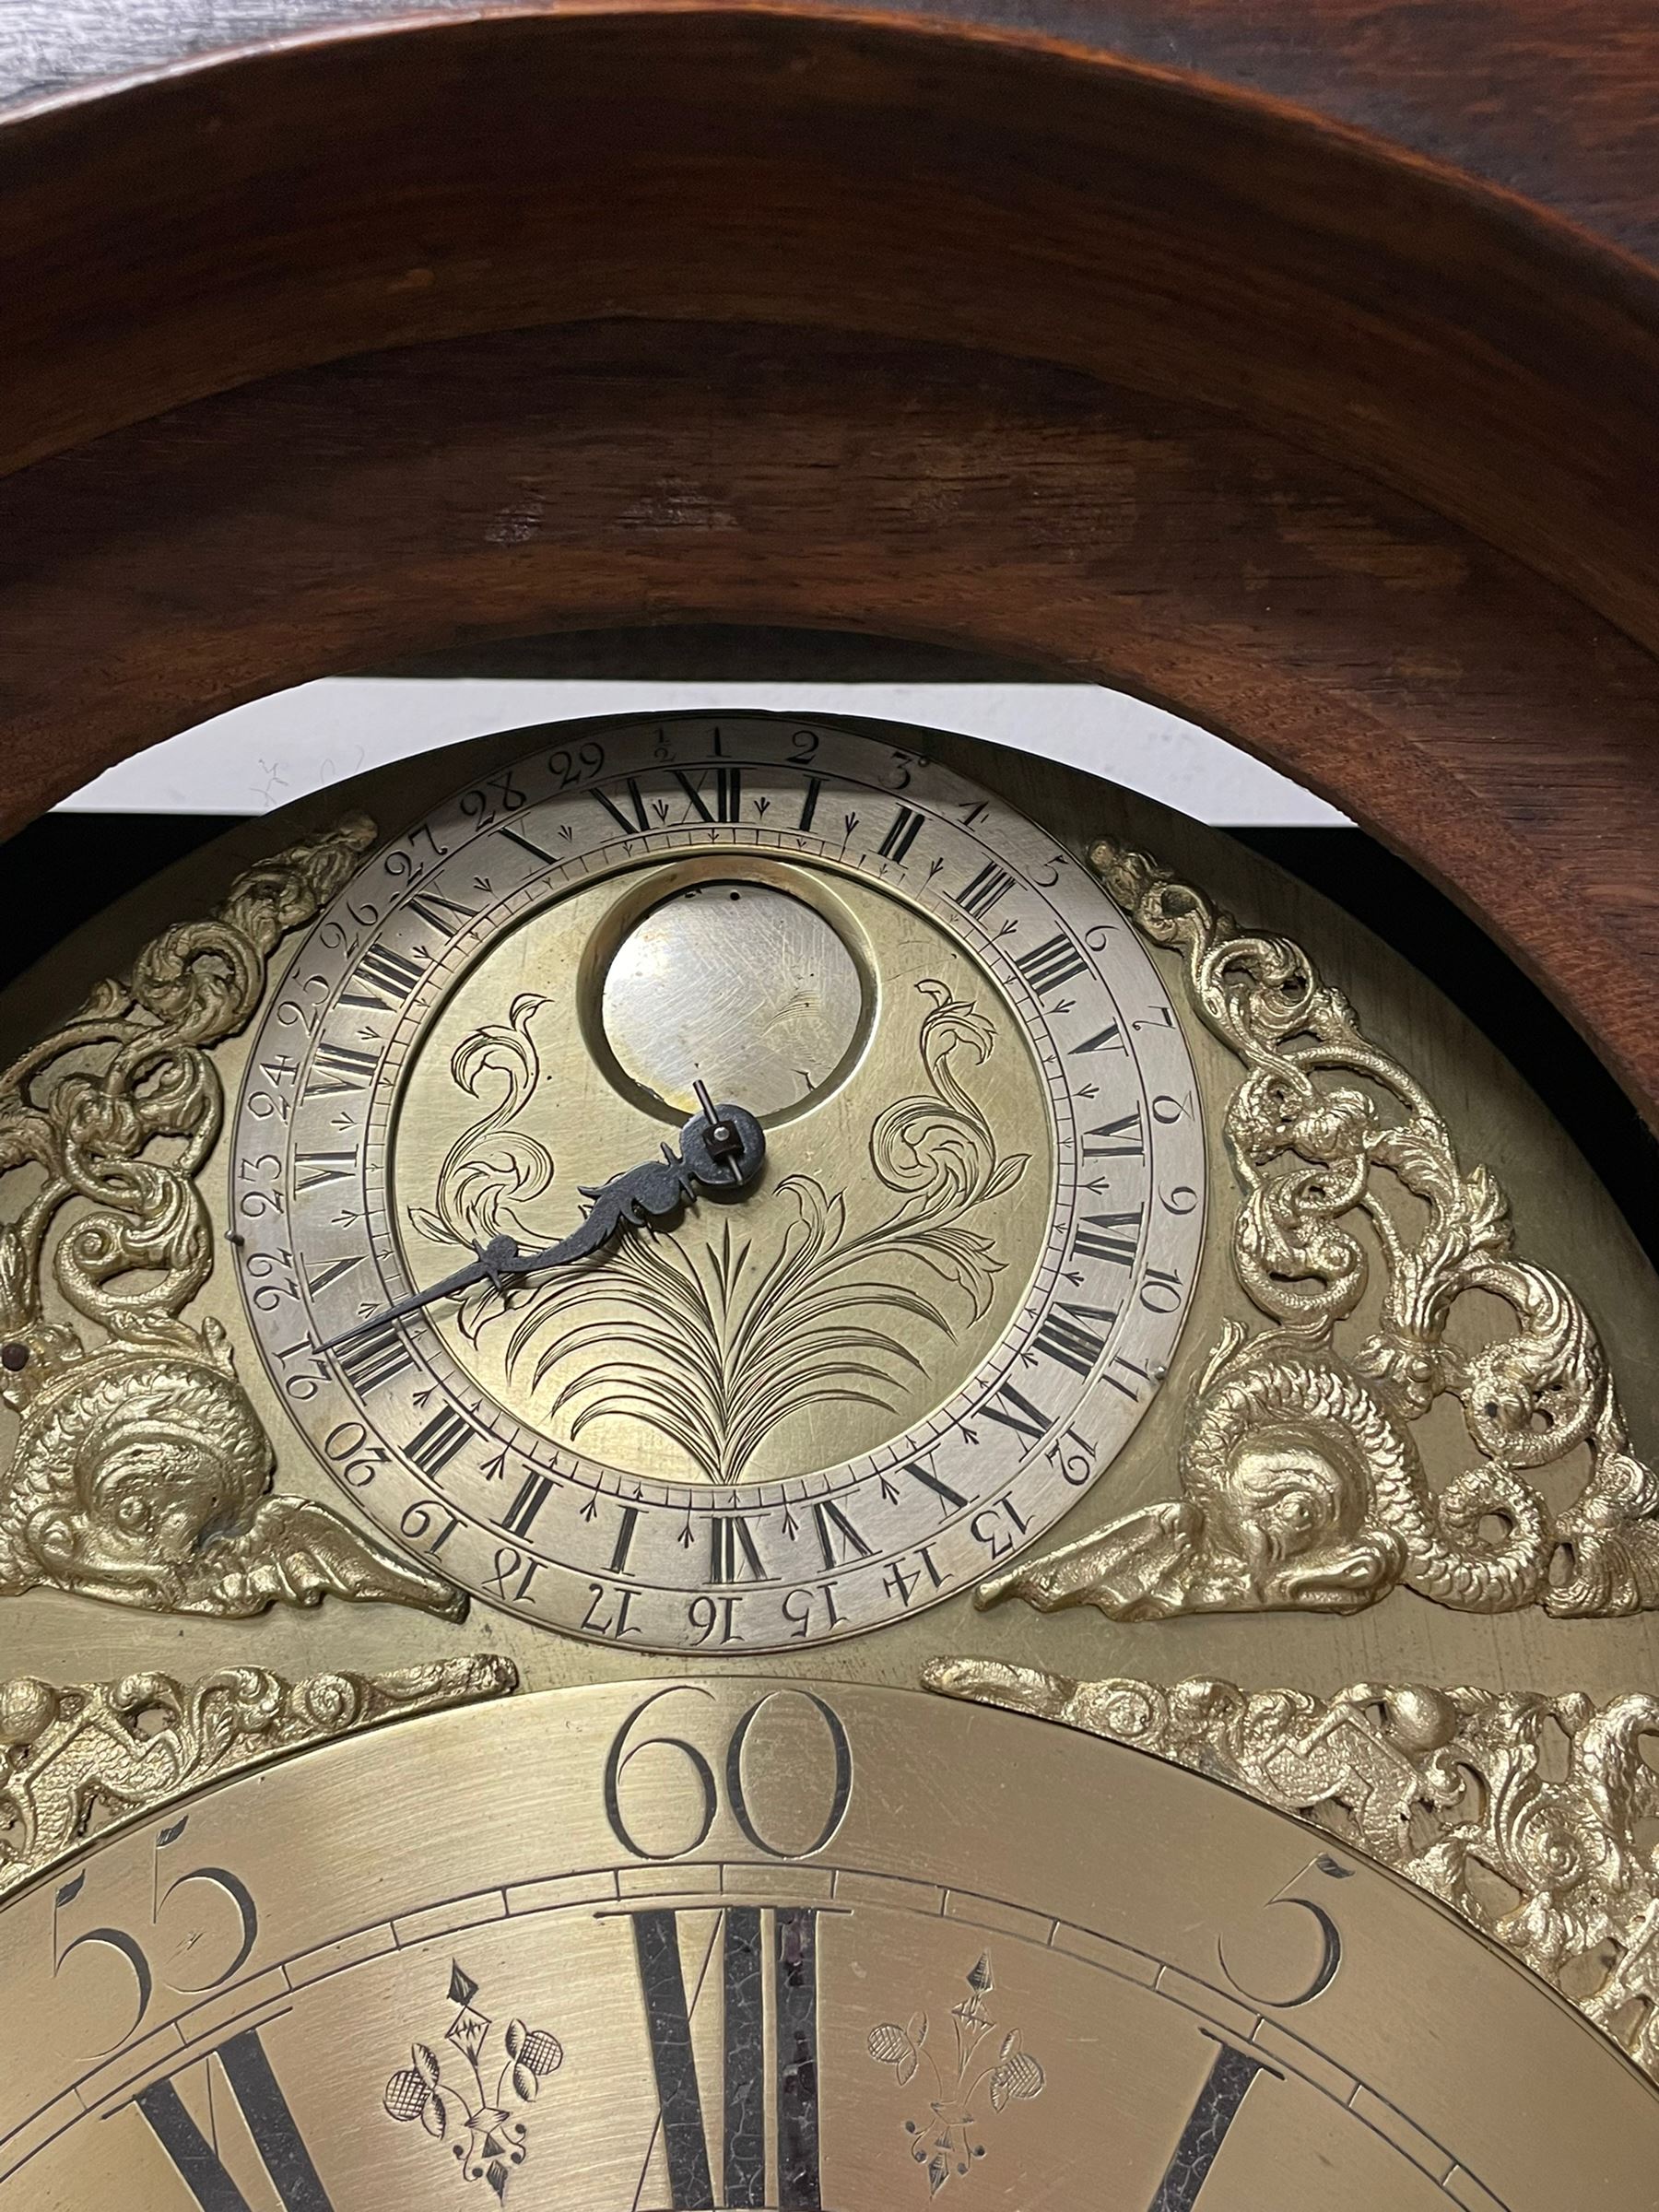 John Greaves of Newcastle - Mid-18th century 8-day oak longcase clock with a flat top - Image 11 of 12